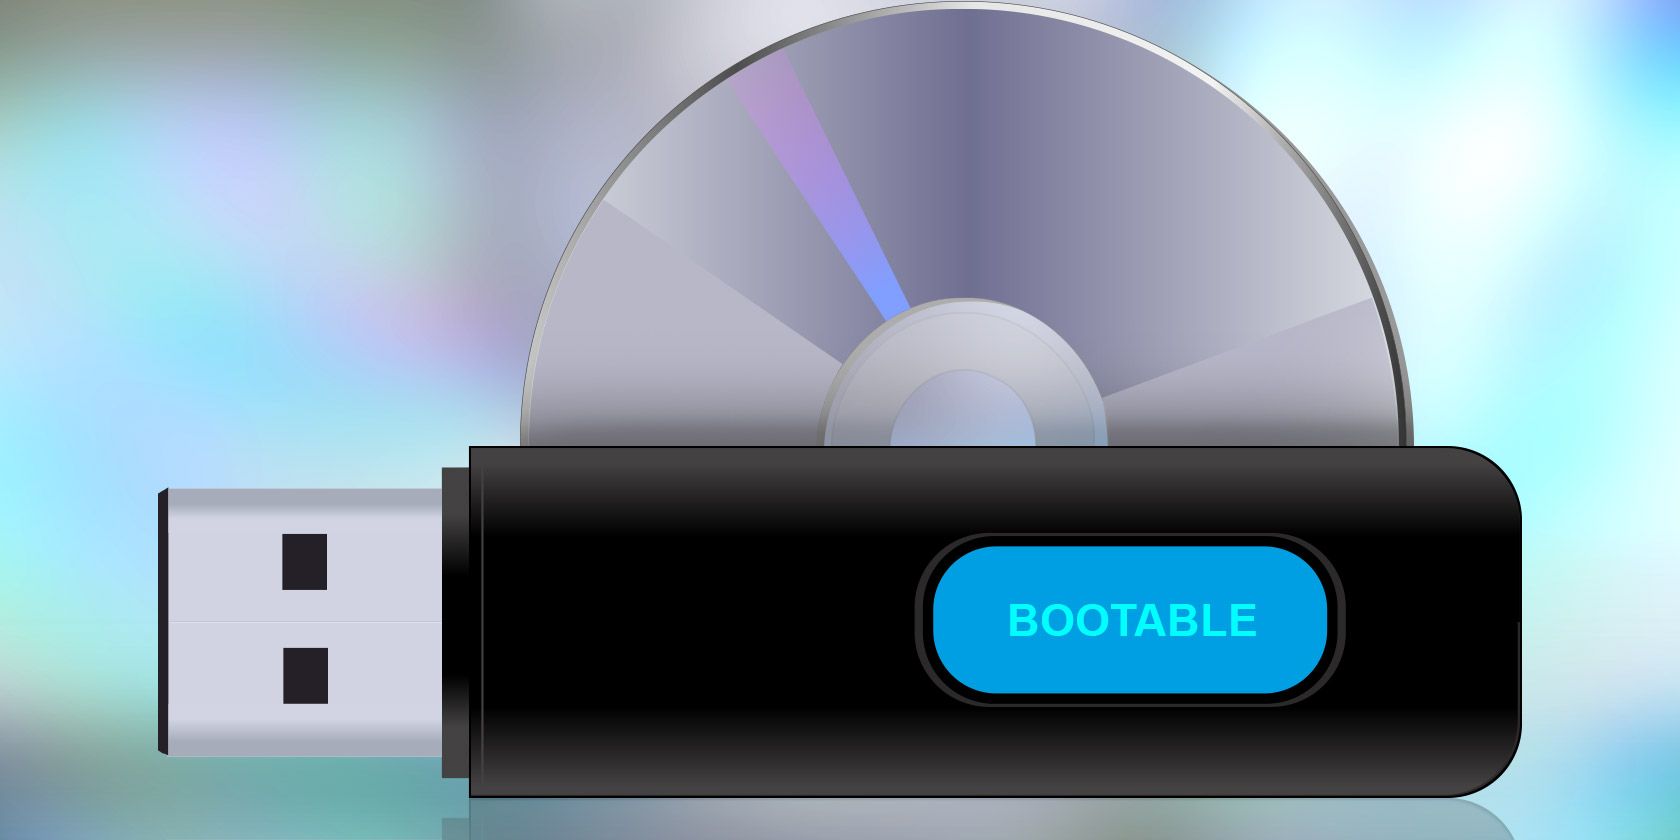 synonymordbog Lav et navn synge How to Create a Bootable USB From an ISO: 6 Useful Tools